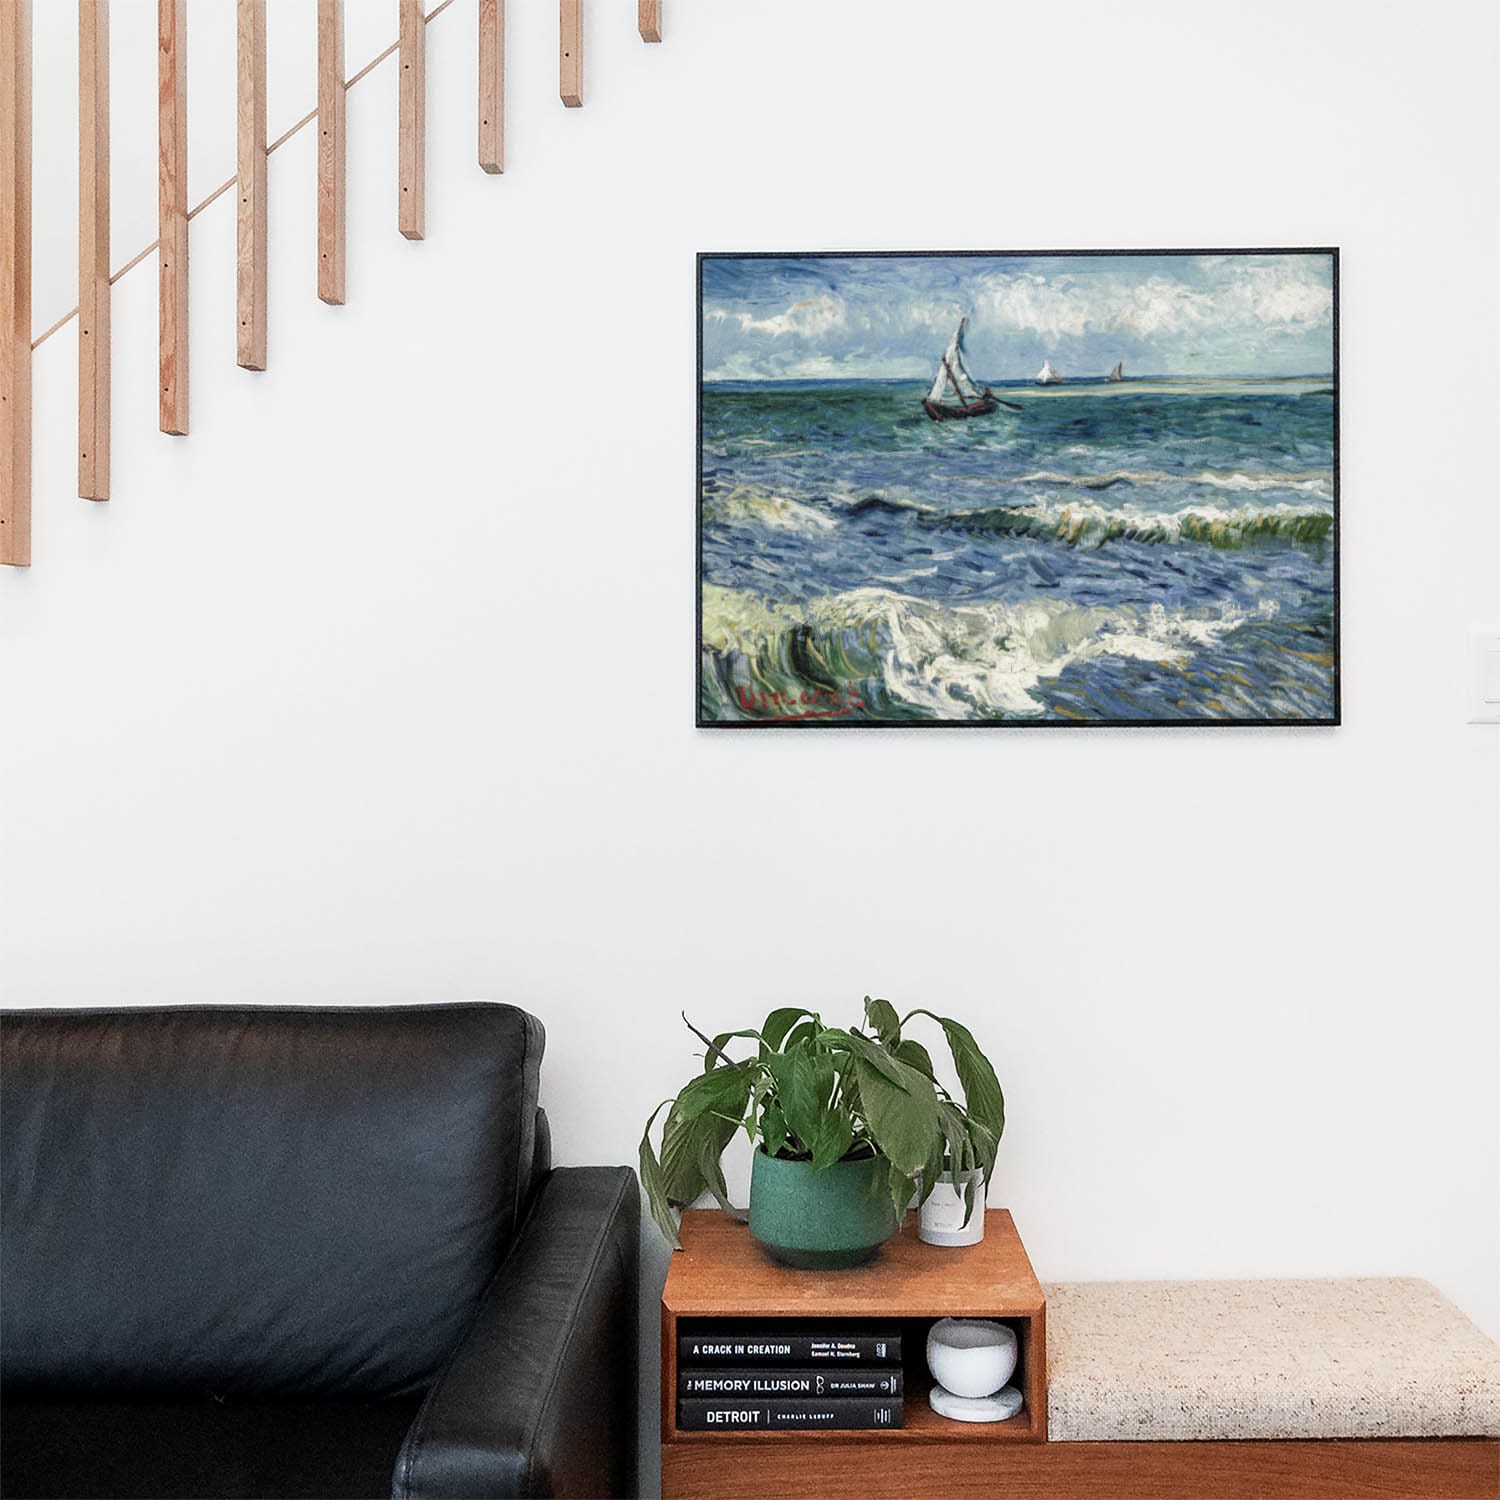 Ocean Painting Wall Art Print in a Picture Frame on Living Room Wall